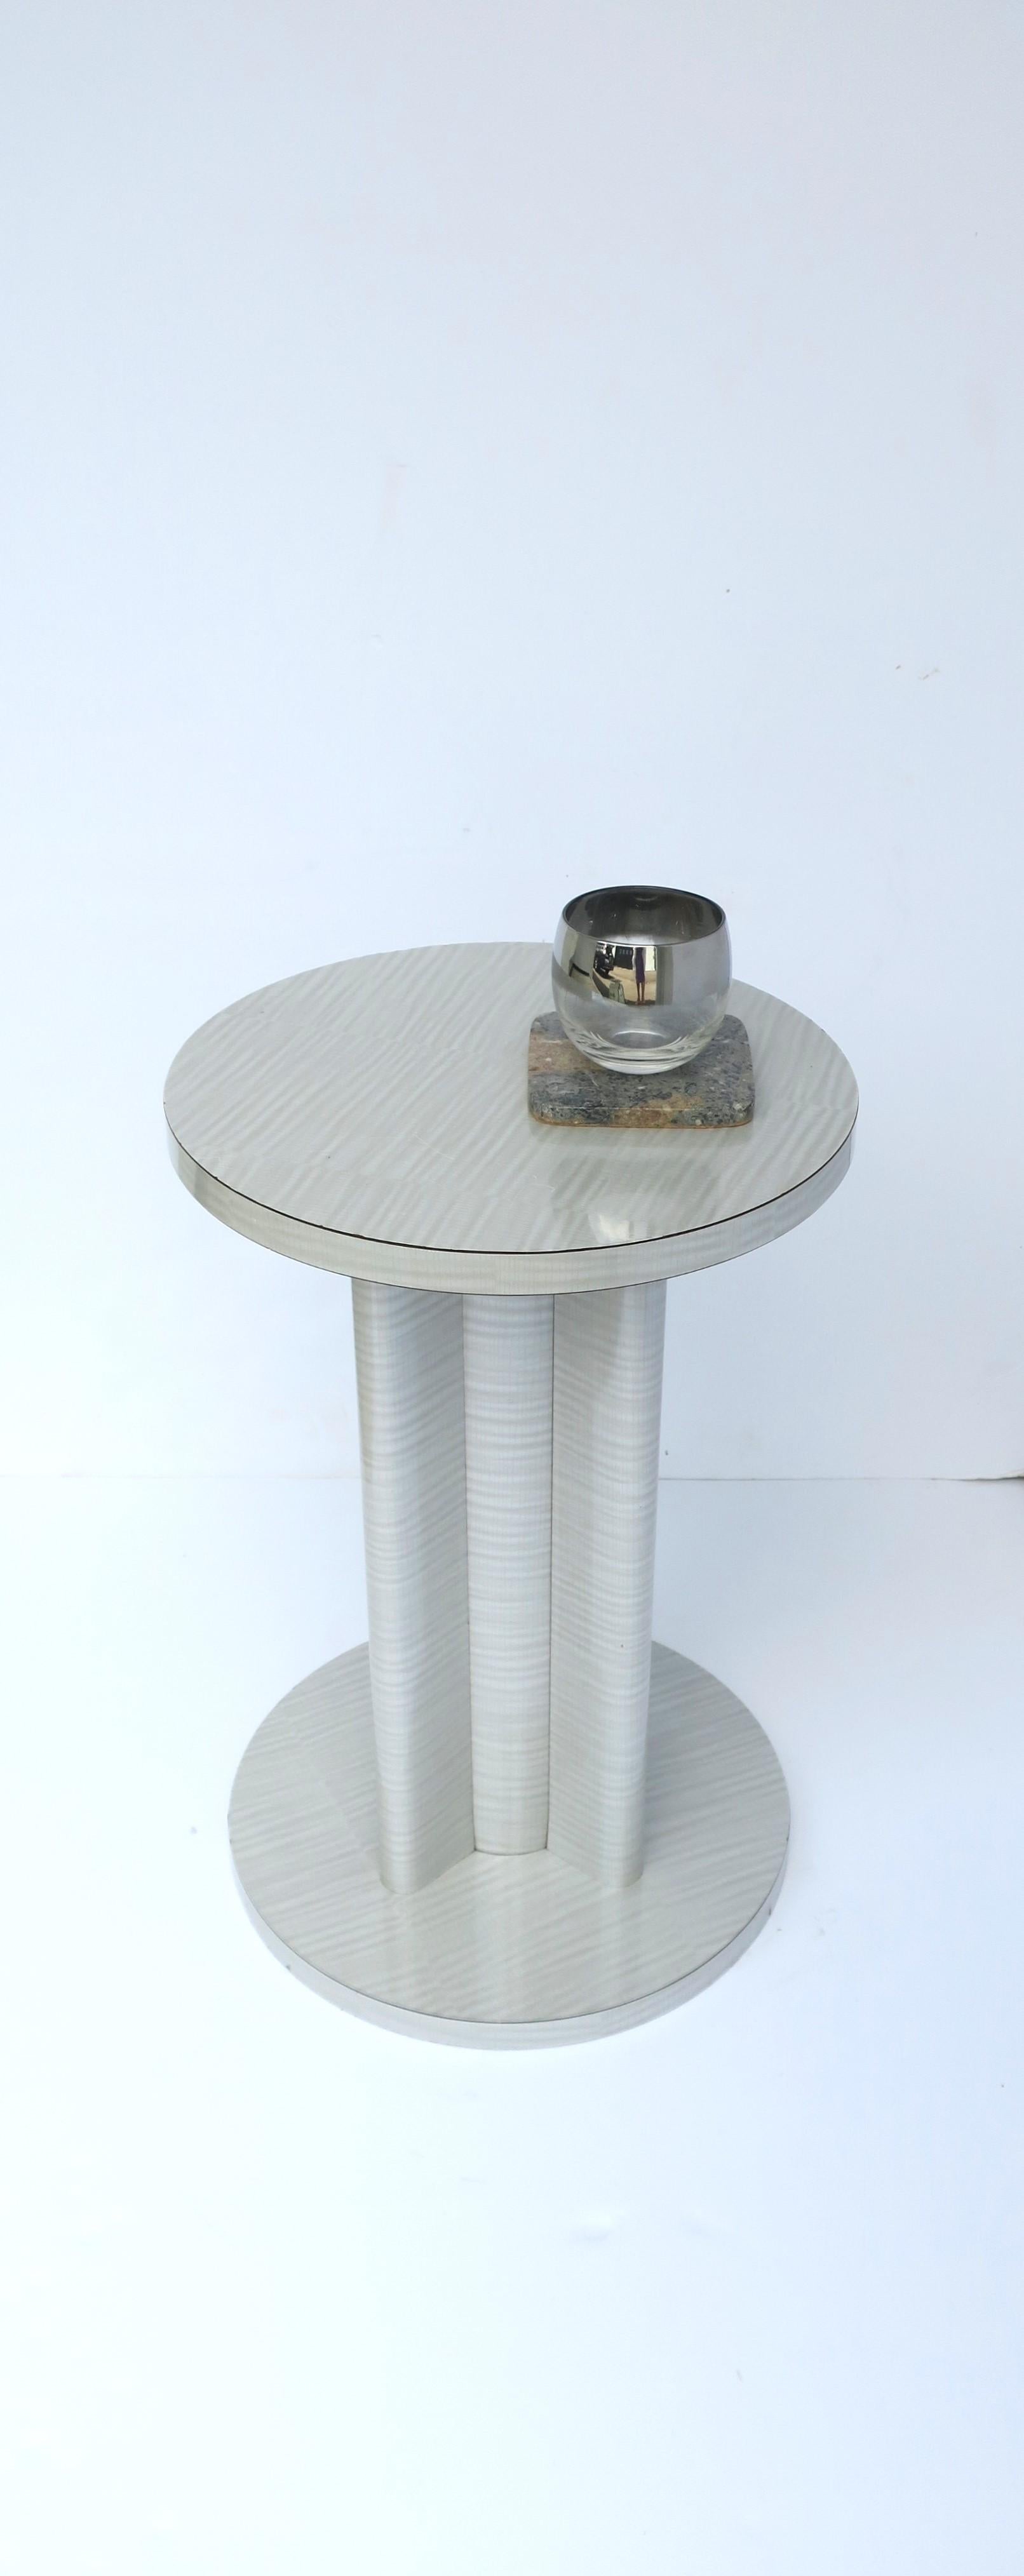 Laminate Art Deco Revival Modern Drinks Side Gueridon Table Silver Grey, circa 1970s For Sale